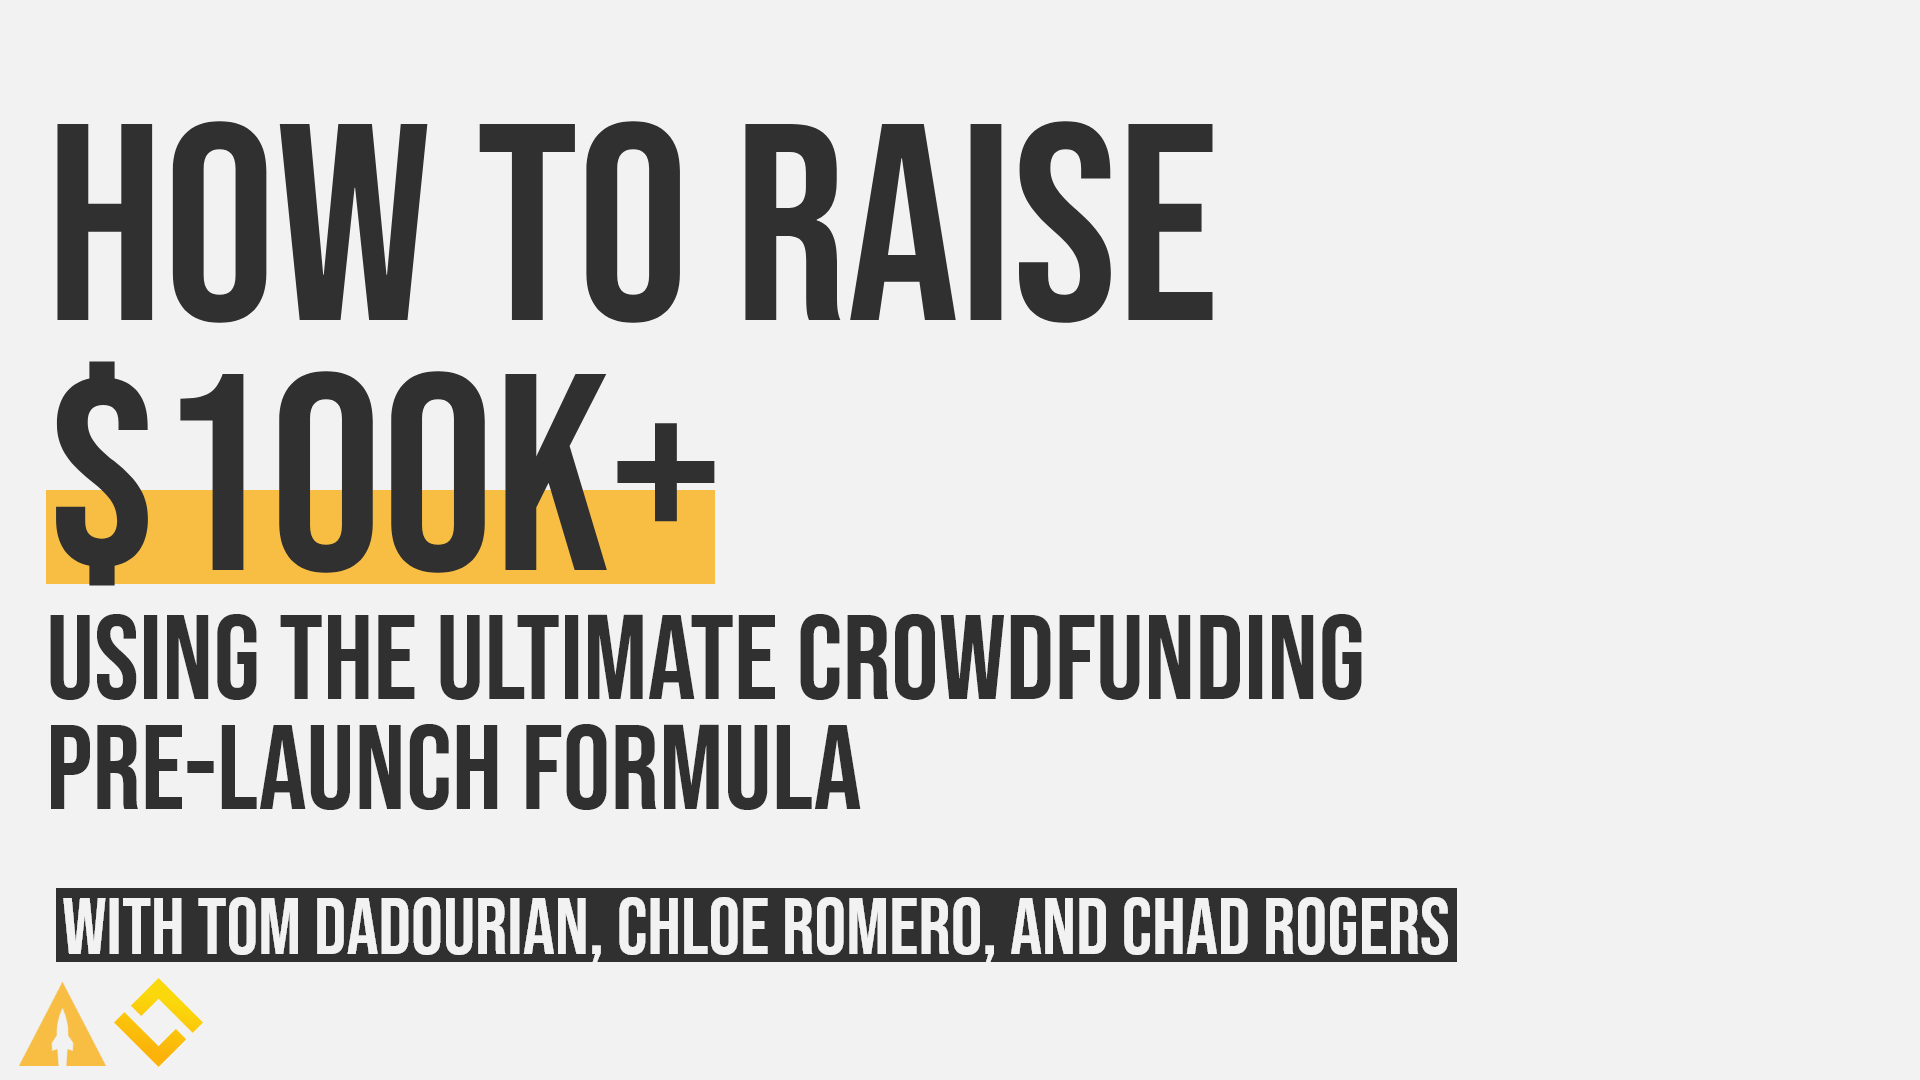 How to raise $100k+ with the ultimate crowdfunding pre-launch formula